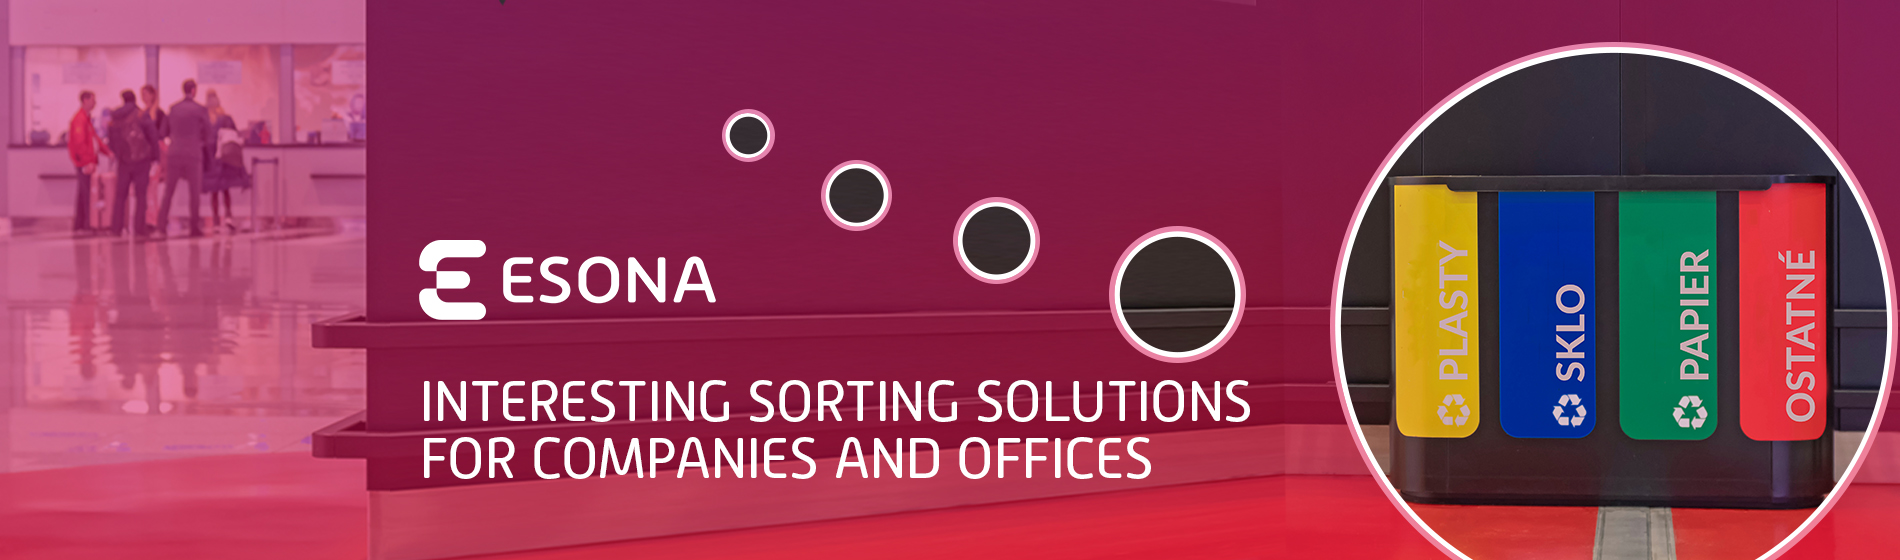 Interesting sorting solutions for companies and offices